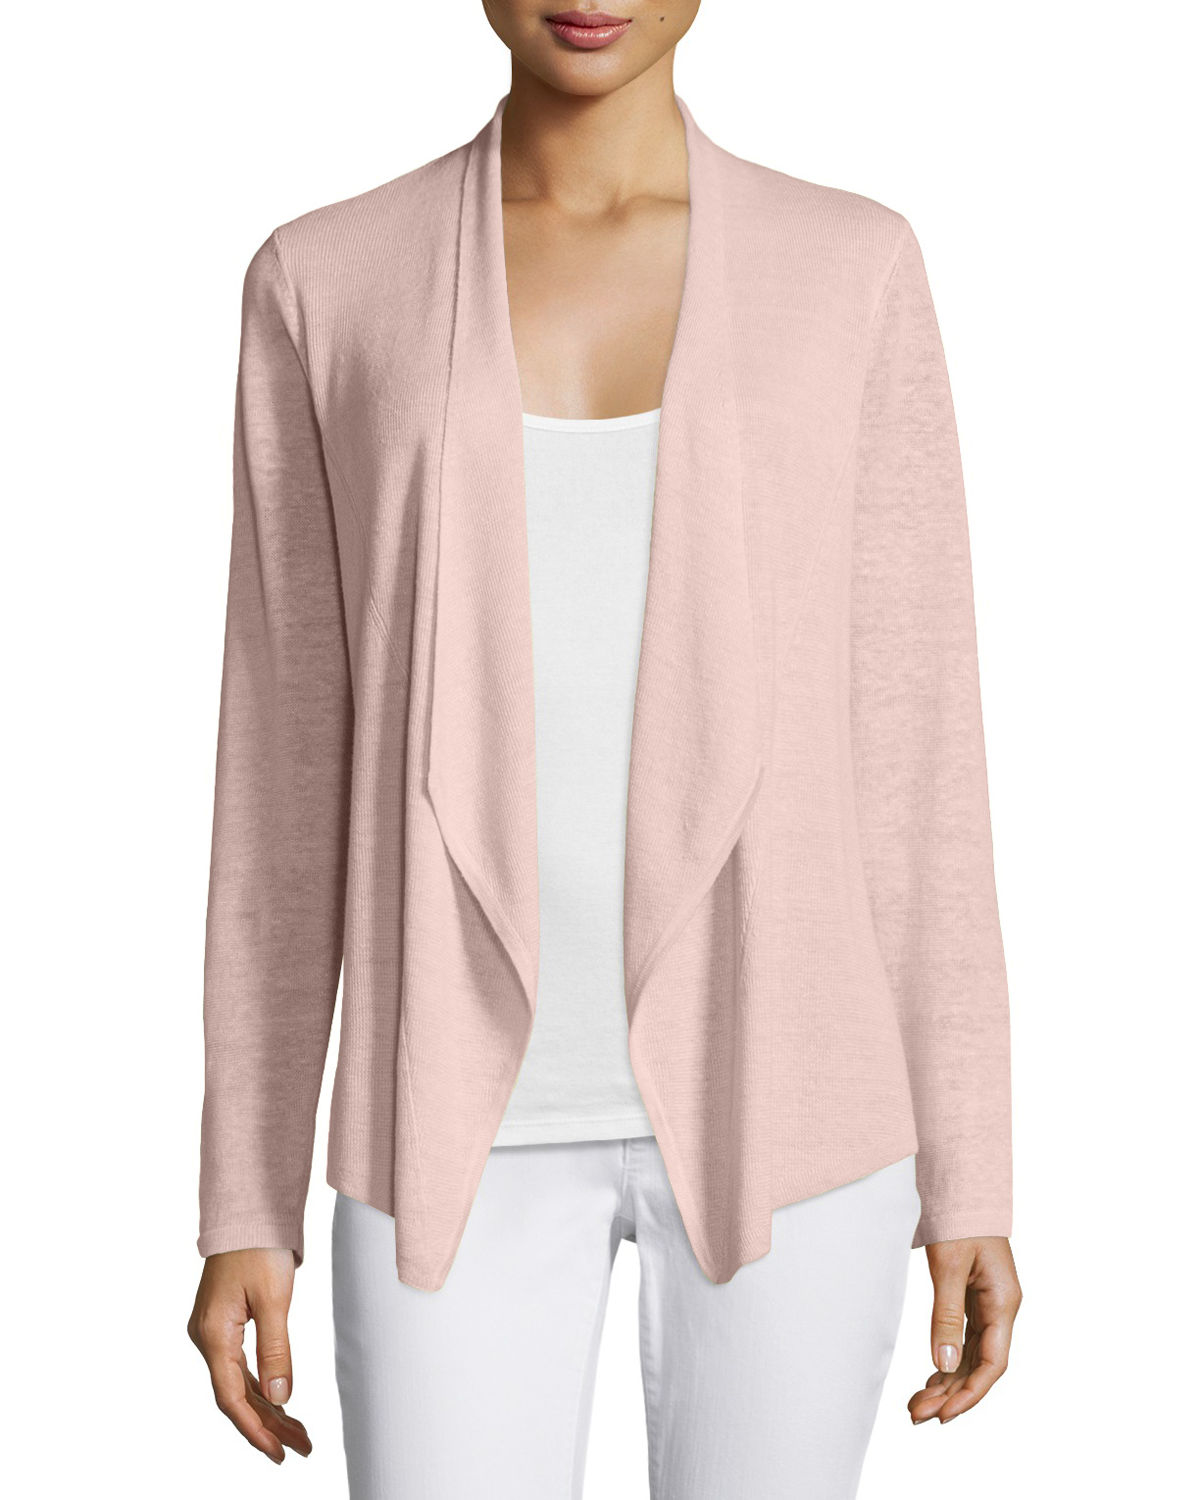 Lyst - Eileen Fisher Lightweight Organic Linen Angled Cardigan in Pink